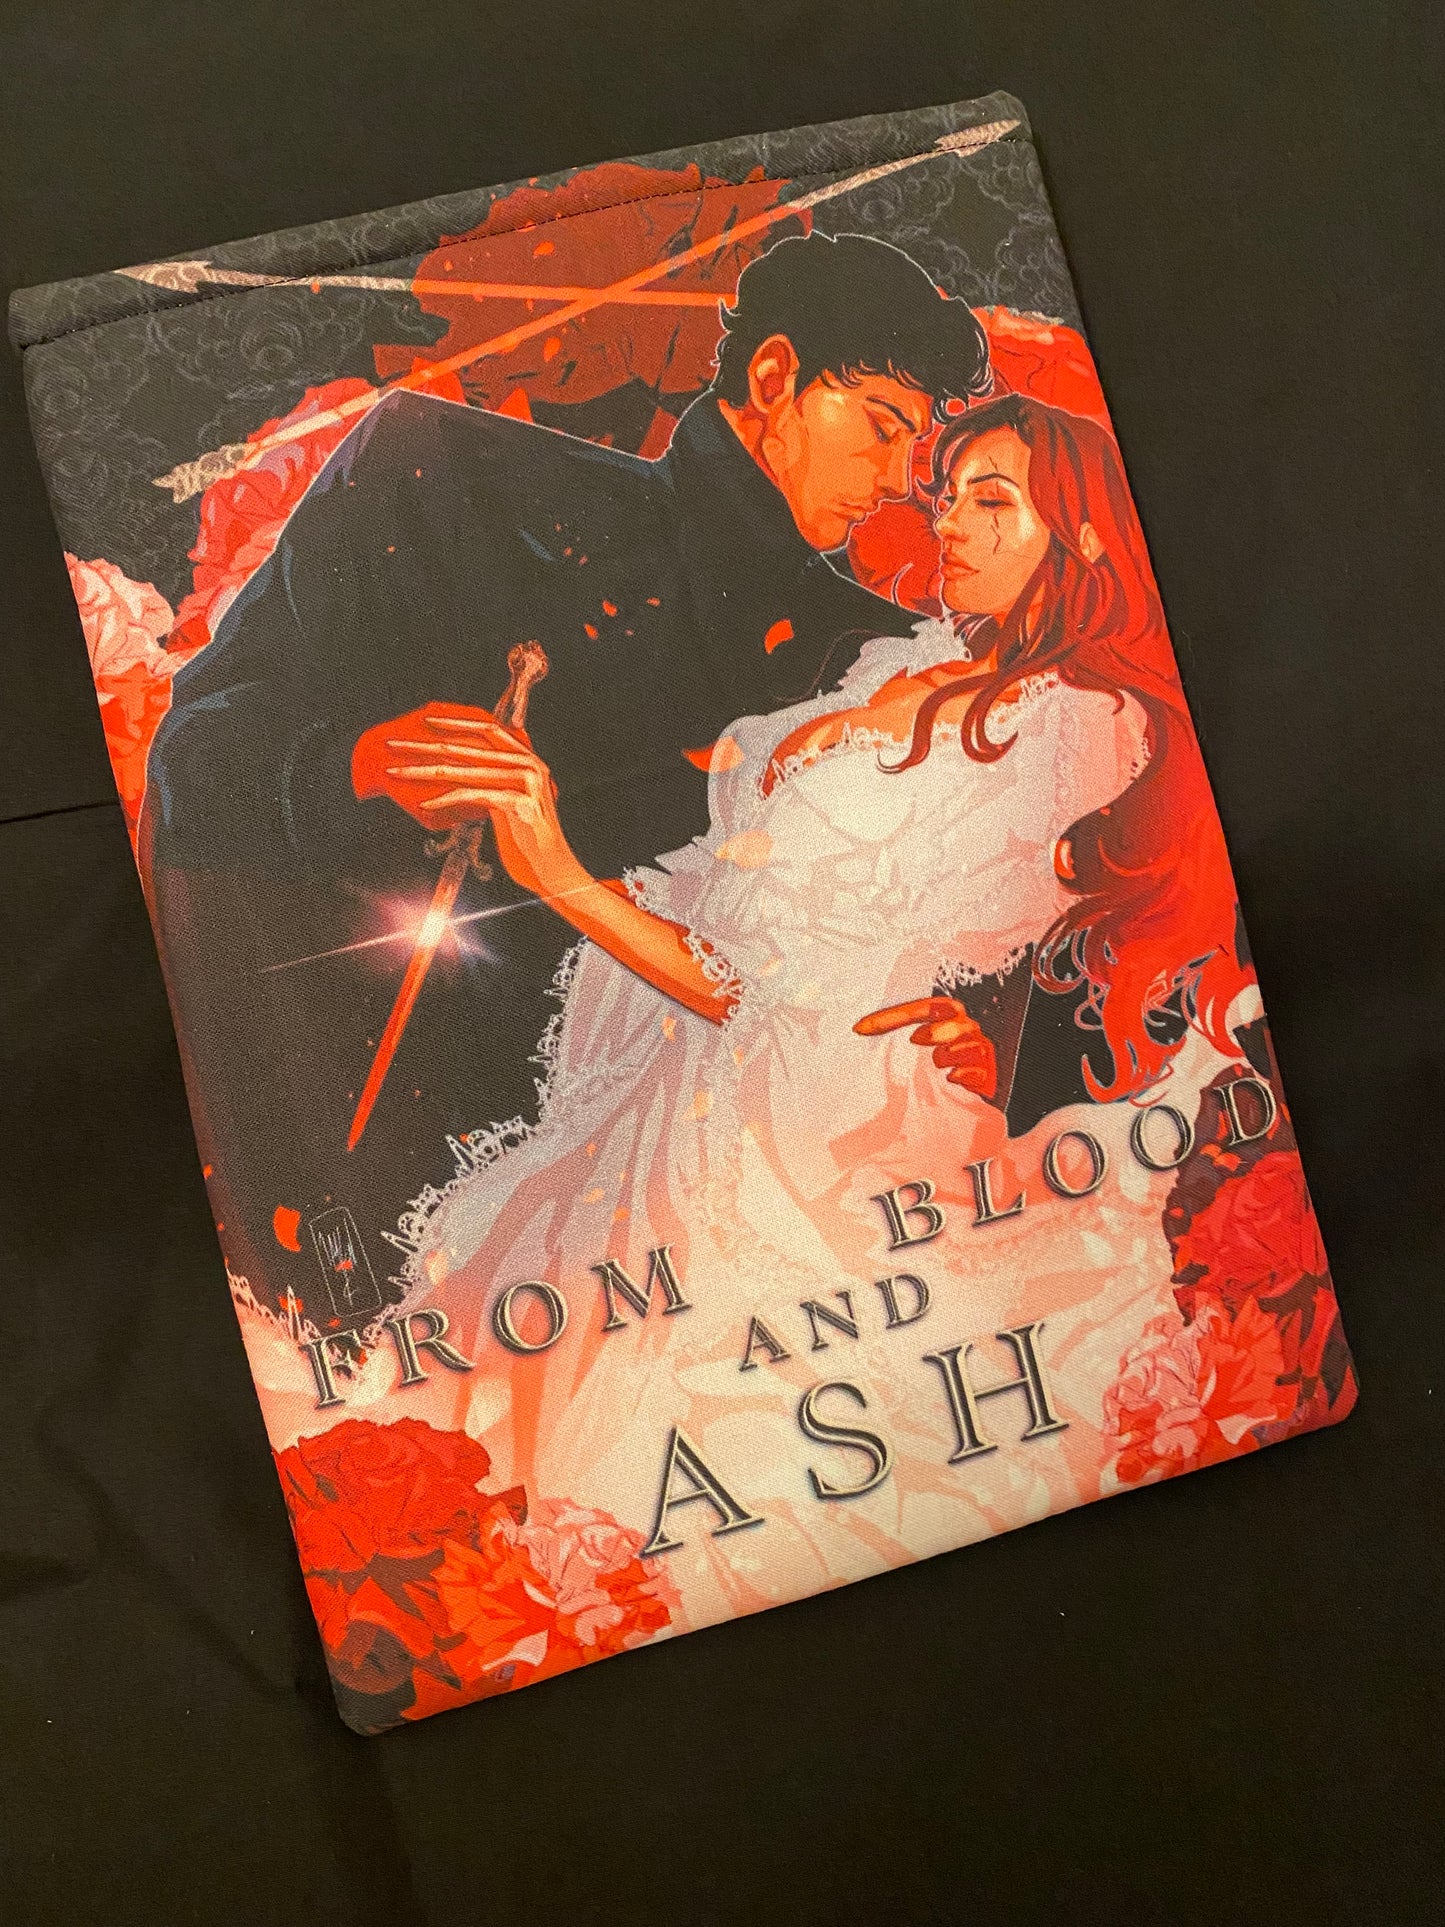 From Blood and Ash Book Sleeve